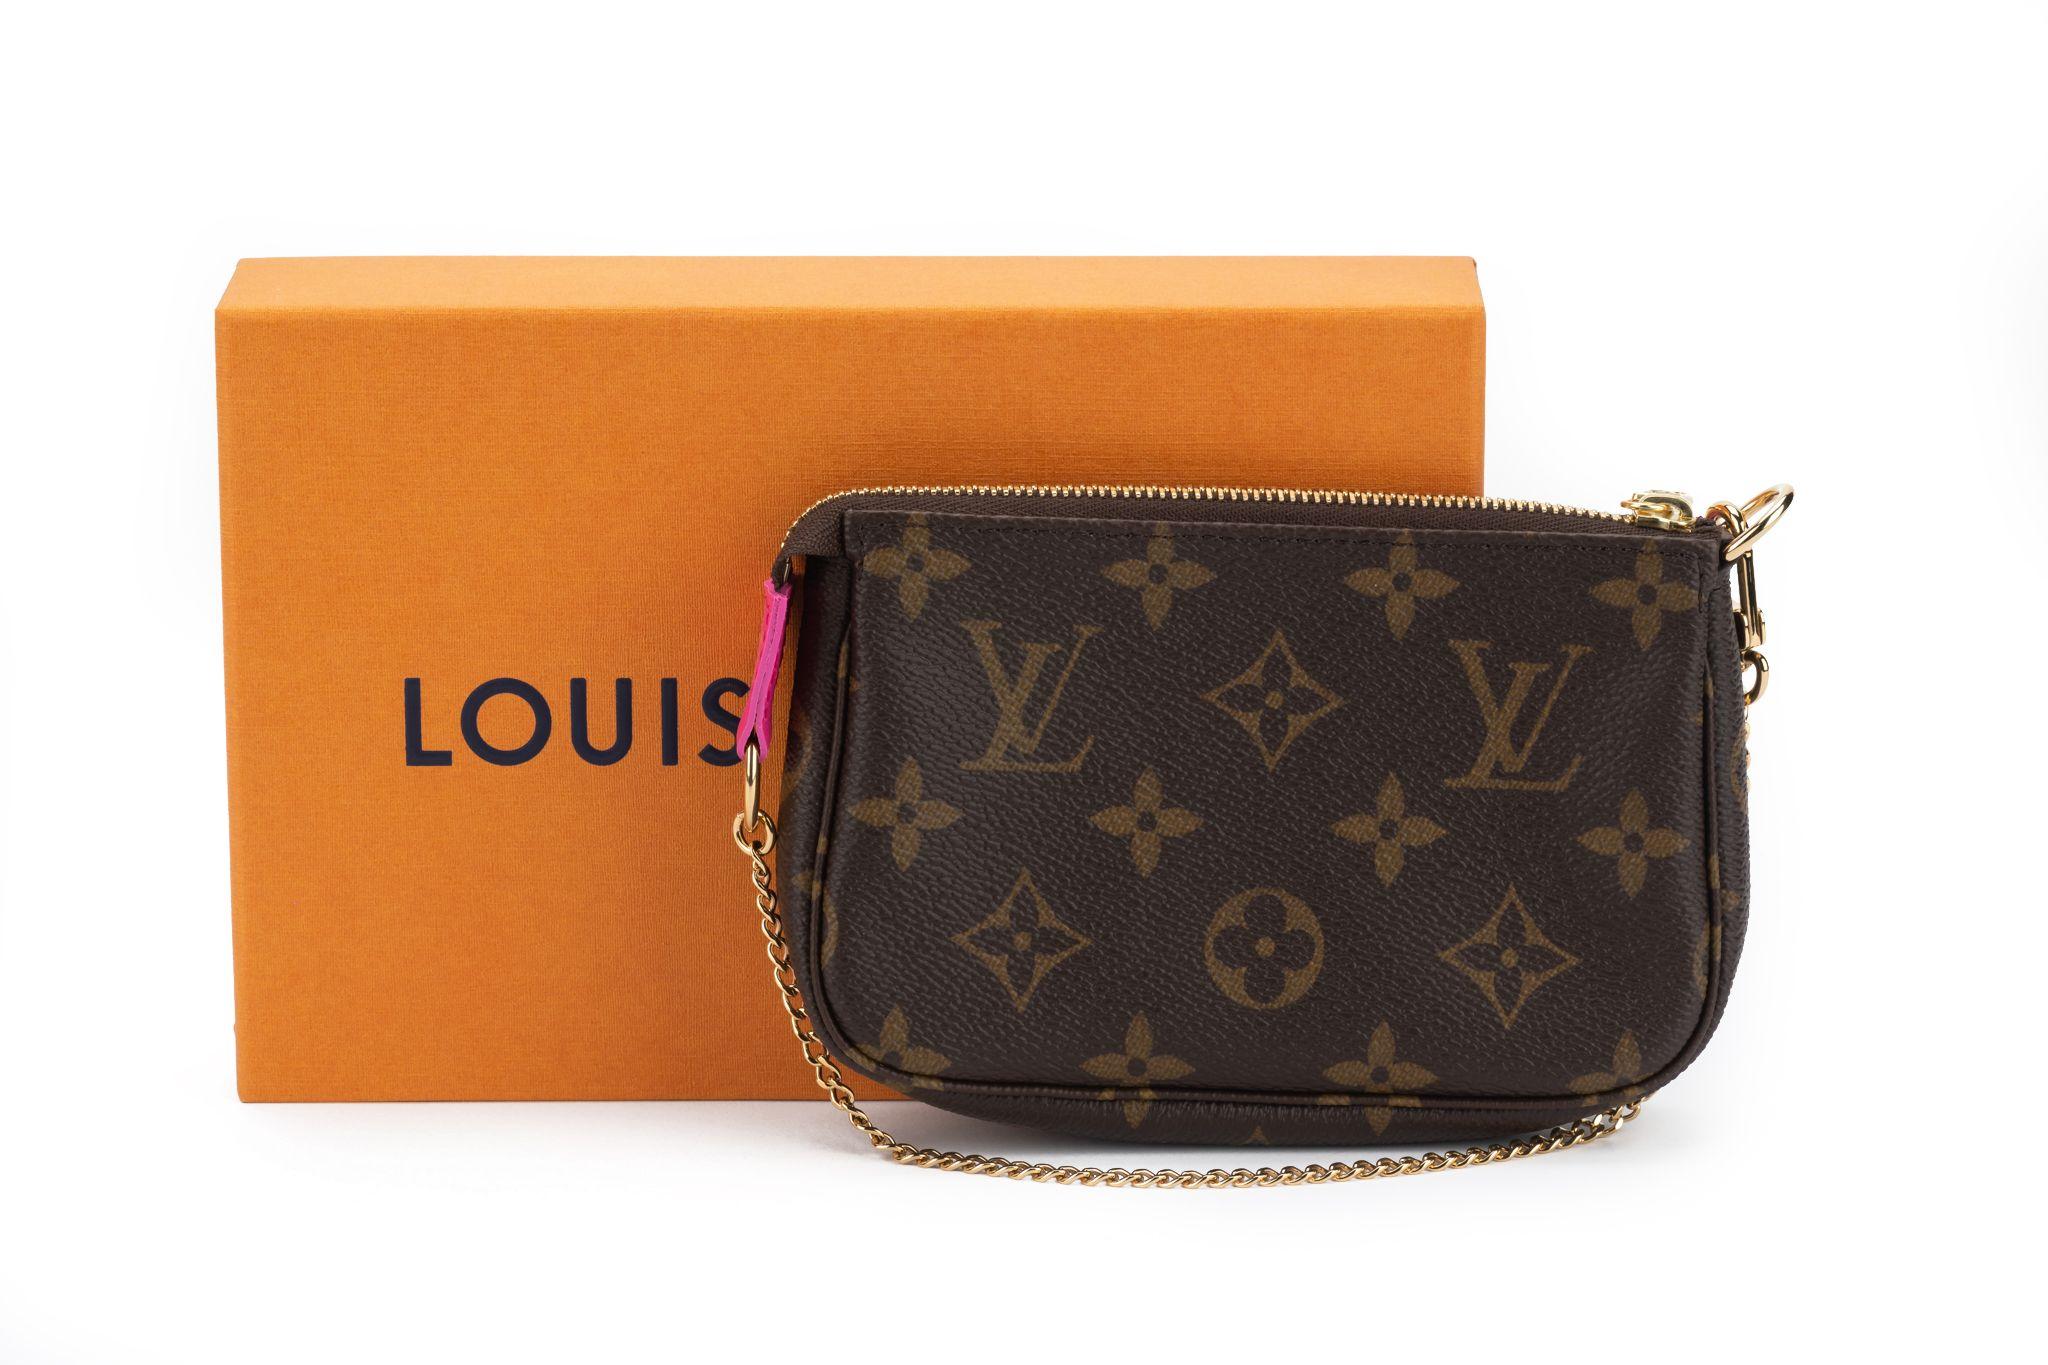 Louis Vuitton Mini Pochette Accessoire belongs to the Vivienne Holidays 2022 collection. It's brand new and comes with the original dustcover and box.